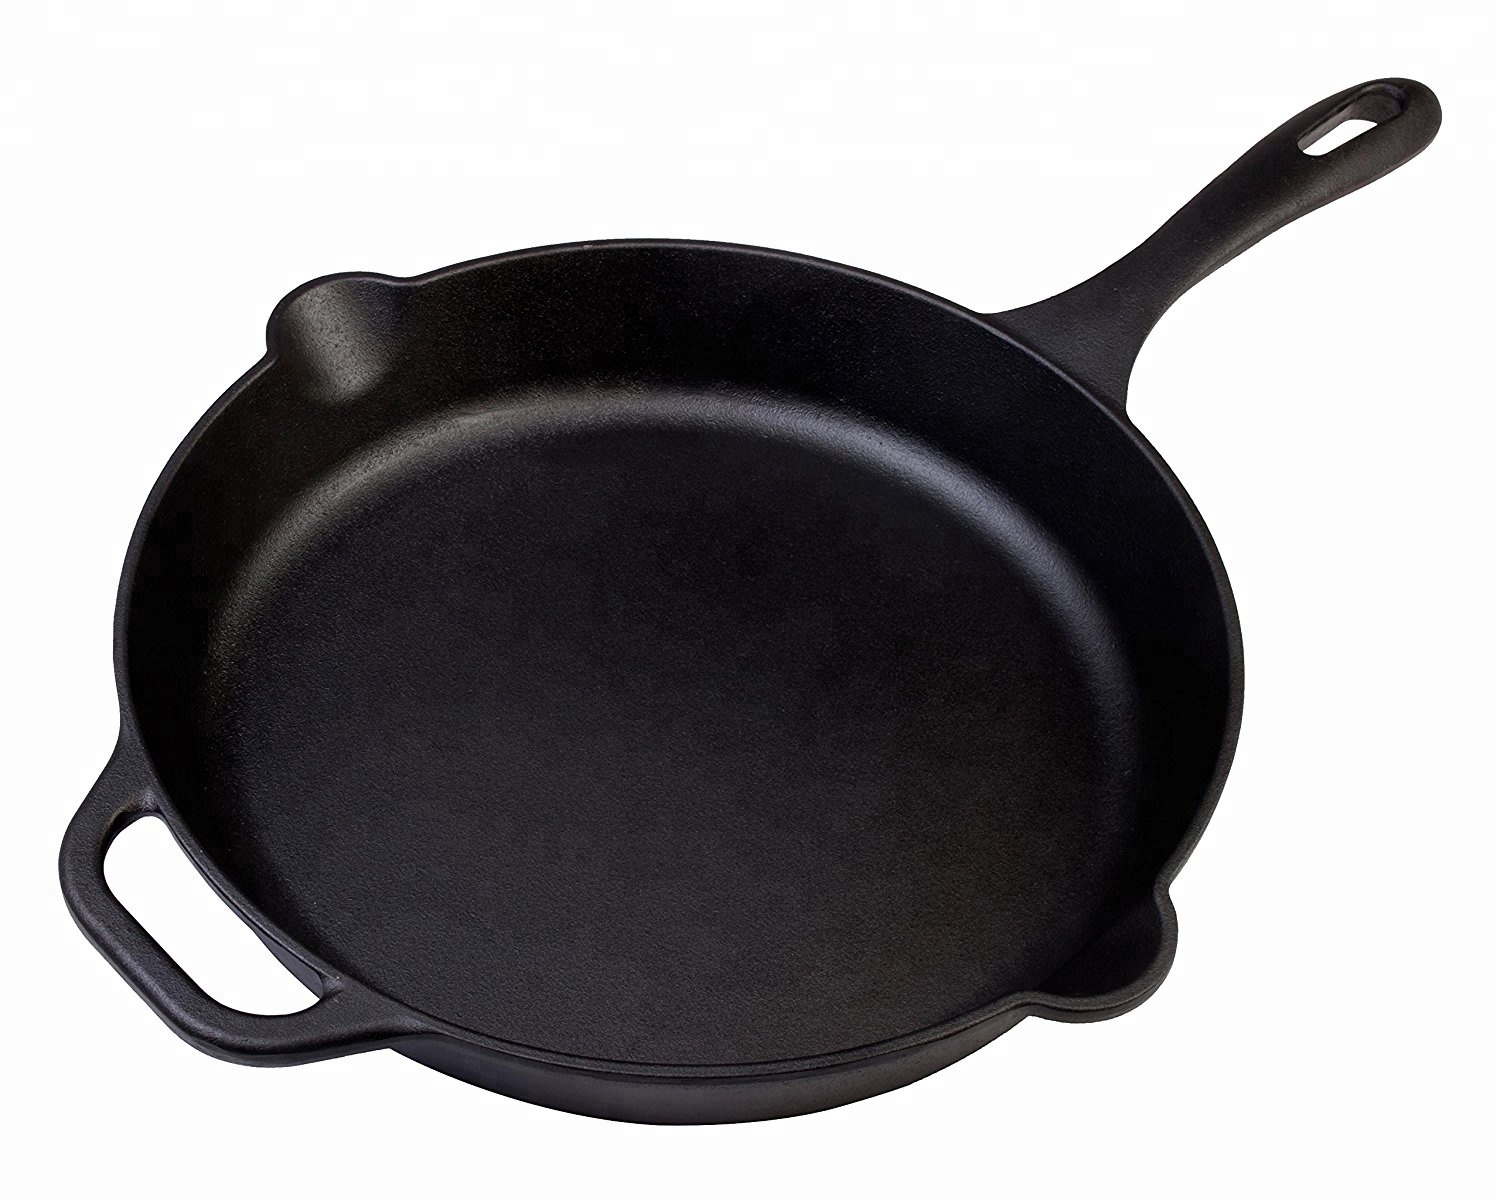 Amazon hot sale 12.5 inch cast iron skillets, Soybean oil coating